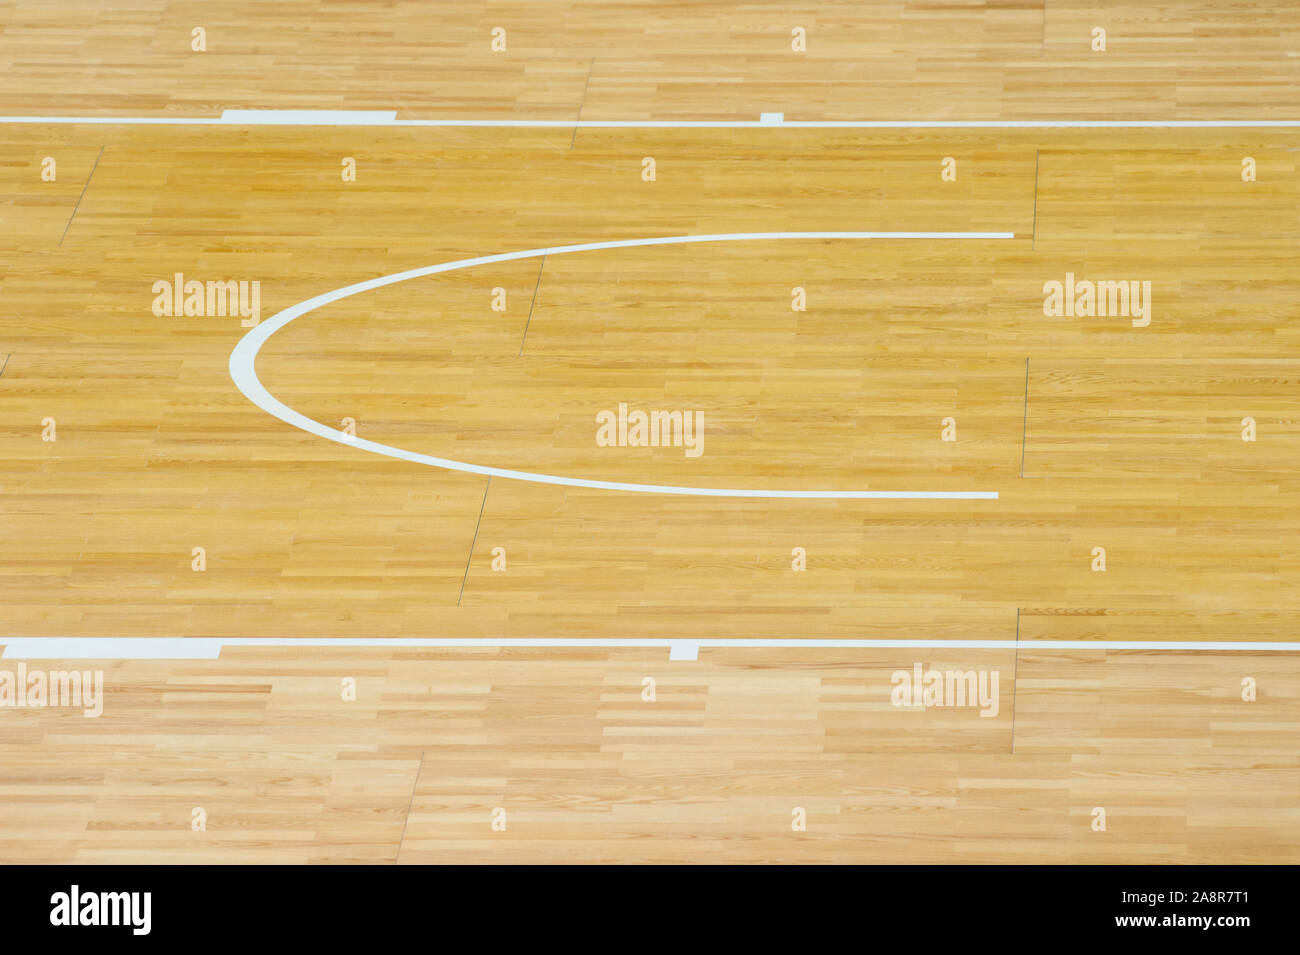 wooden floor volleyball, basketball, badminton, futsal, handball court with light effect Wooden floor of sports hall with marking lines line on wooden Stock Photo